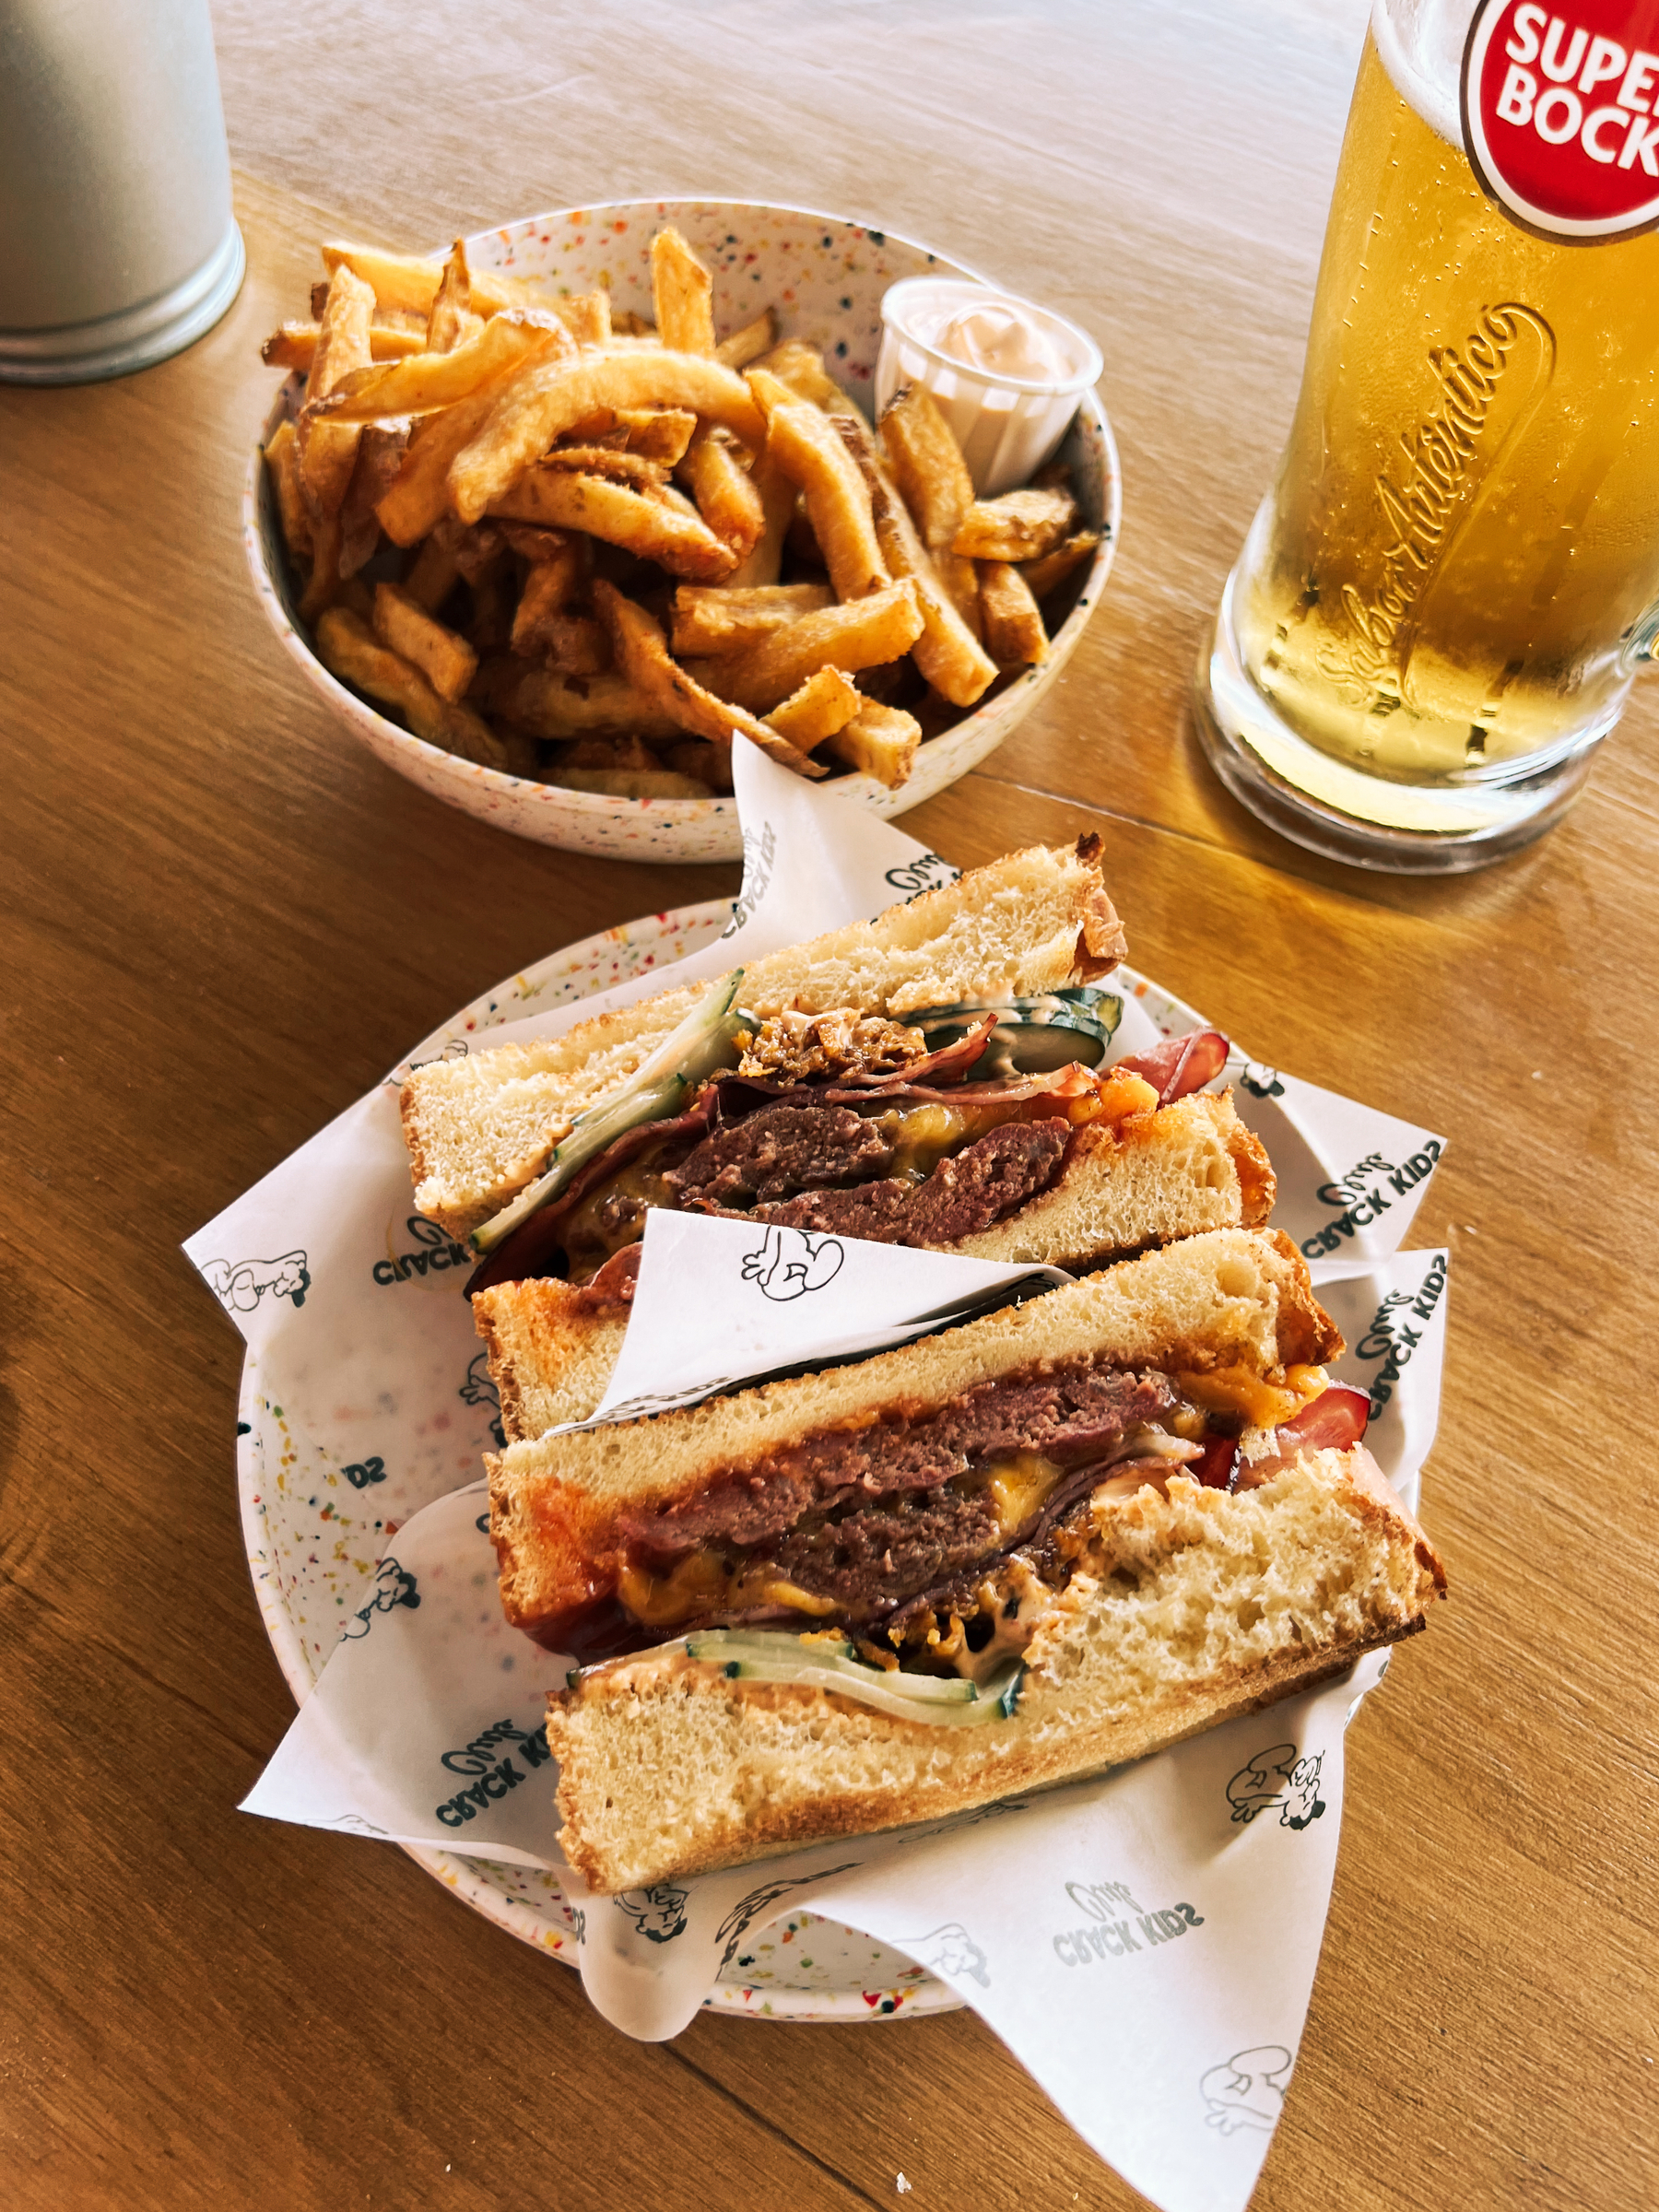 A cheeseburger sando, with fries and beer. 